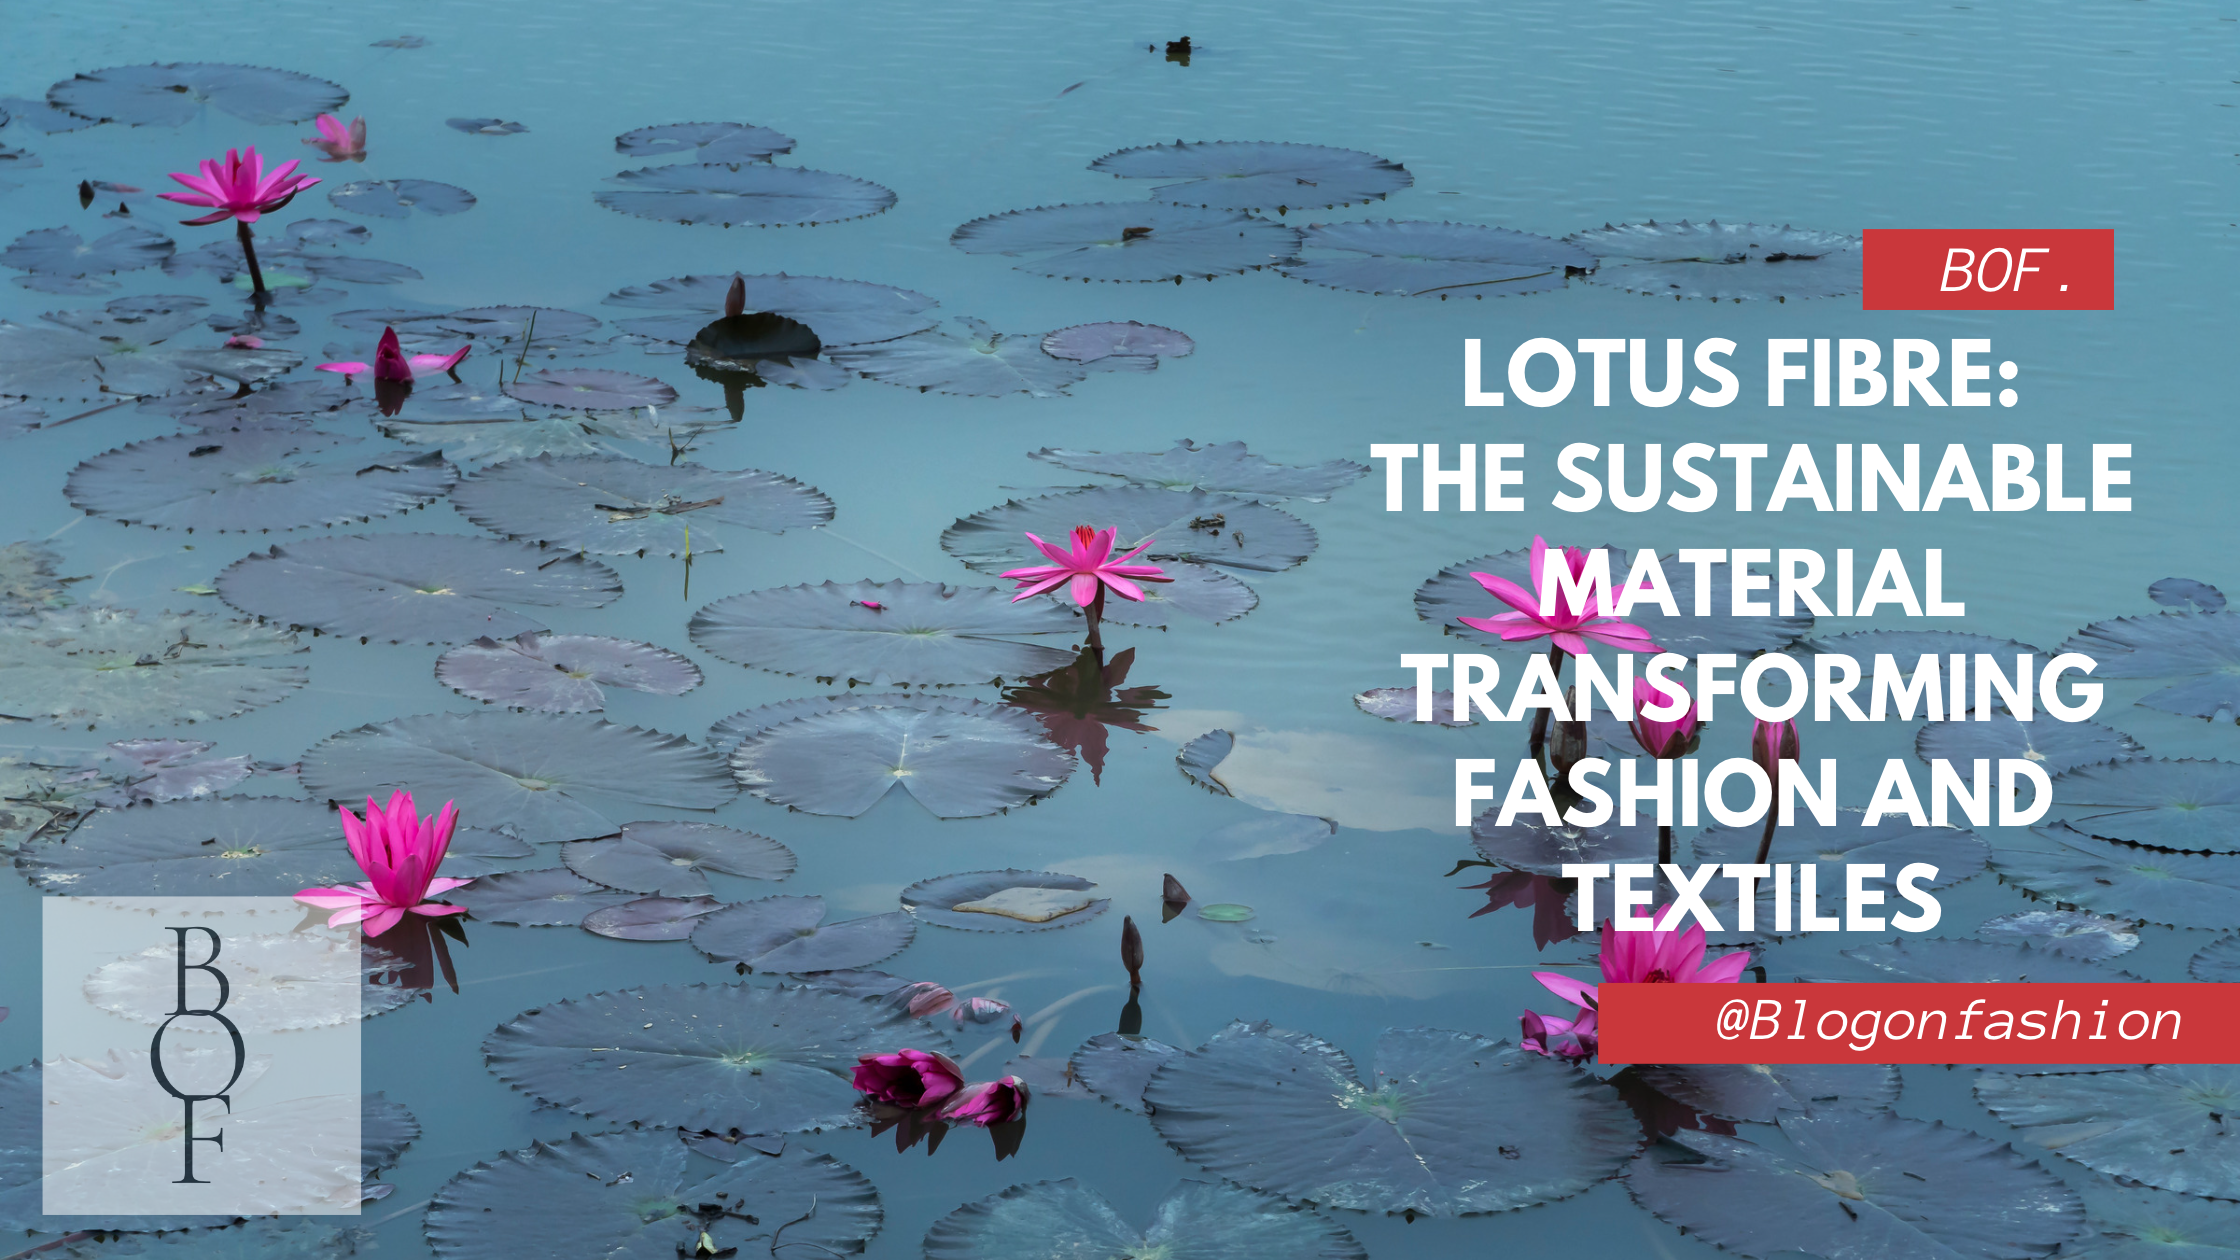 Lotus Fibre: The Sustainable Material Transforming Fashion and Textiles